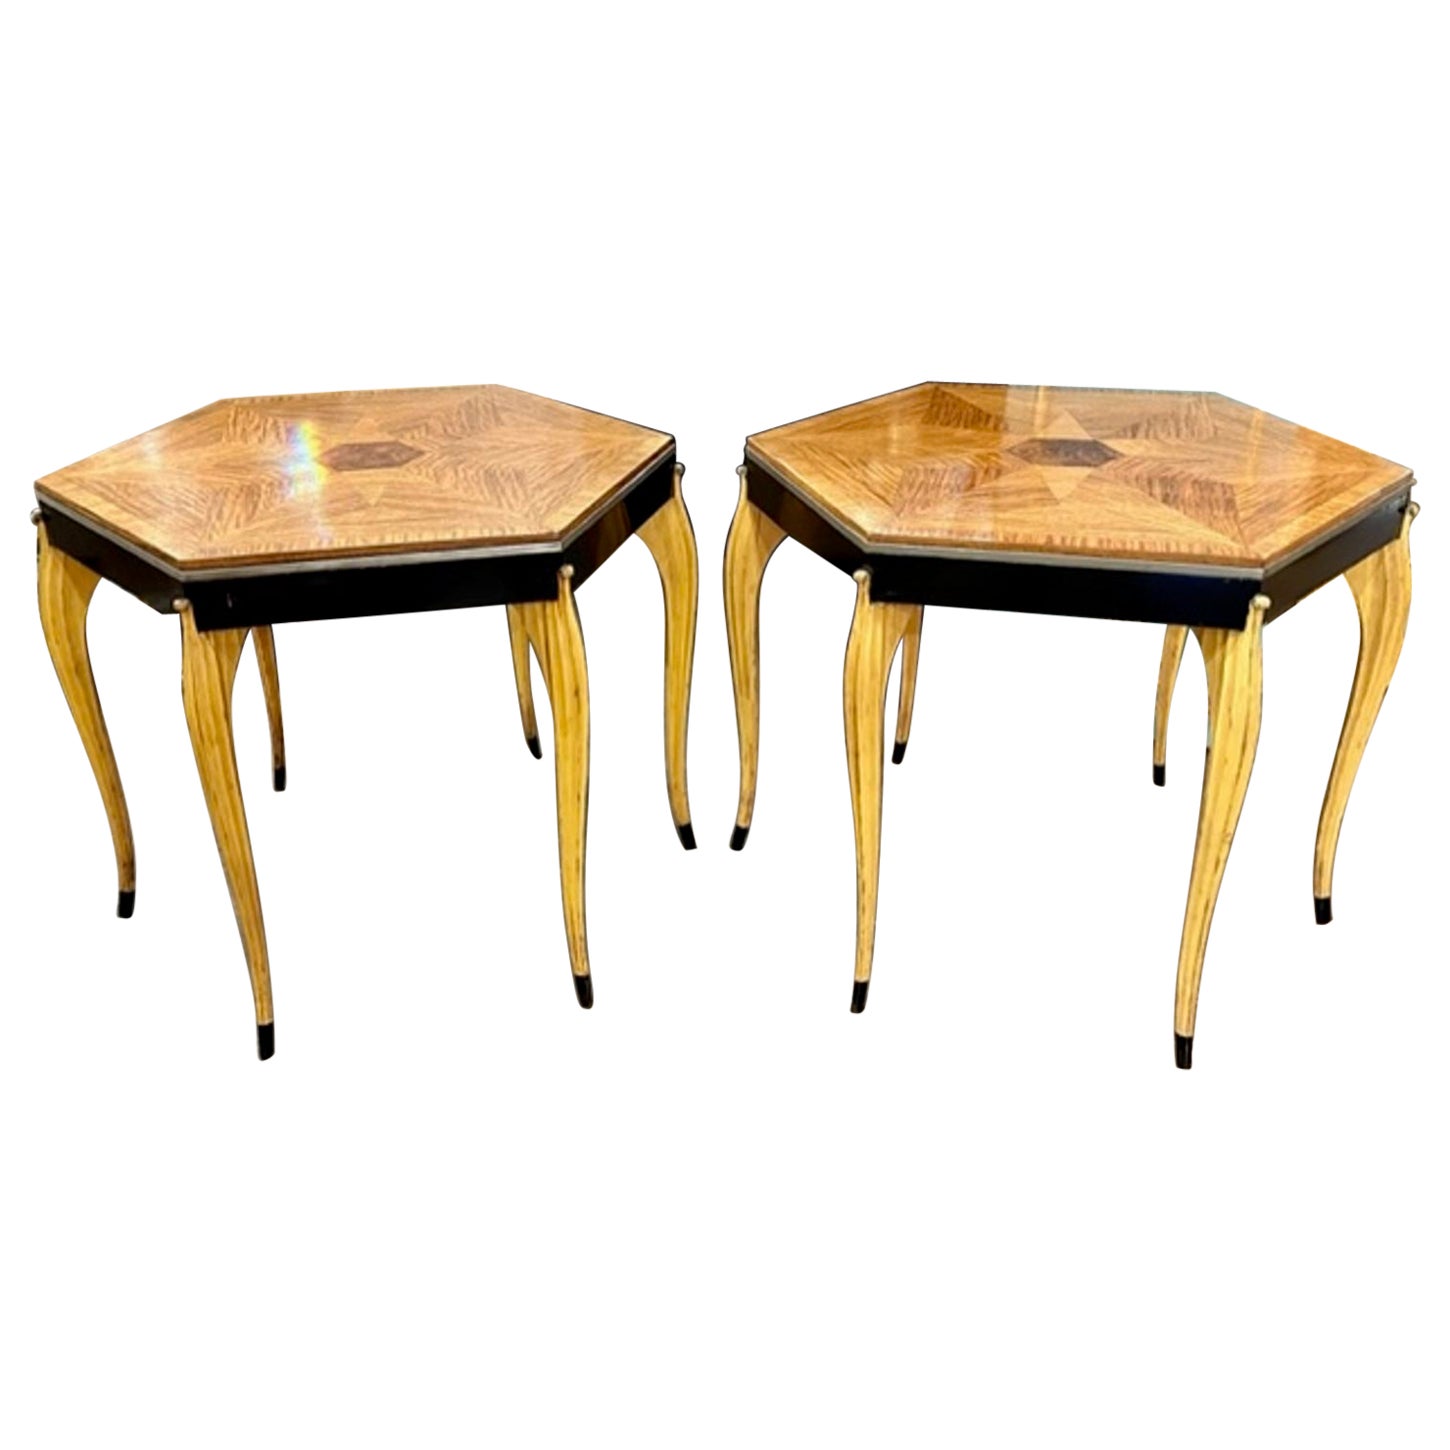 Pair of French Art Deco Oak Inlaid Side Tables